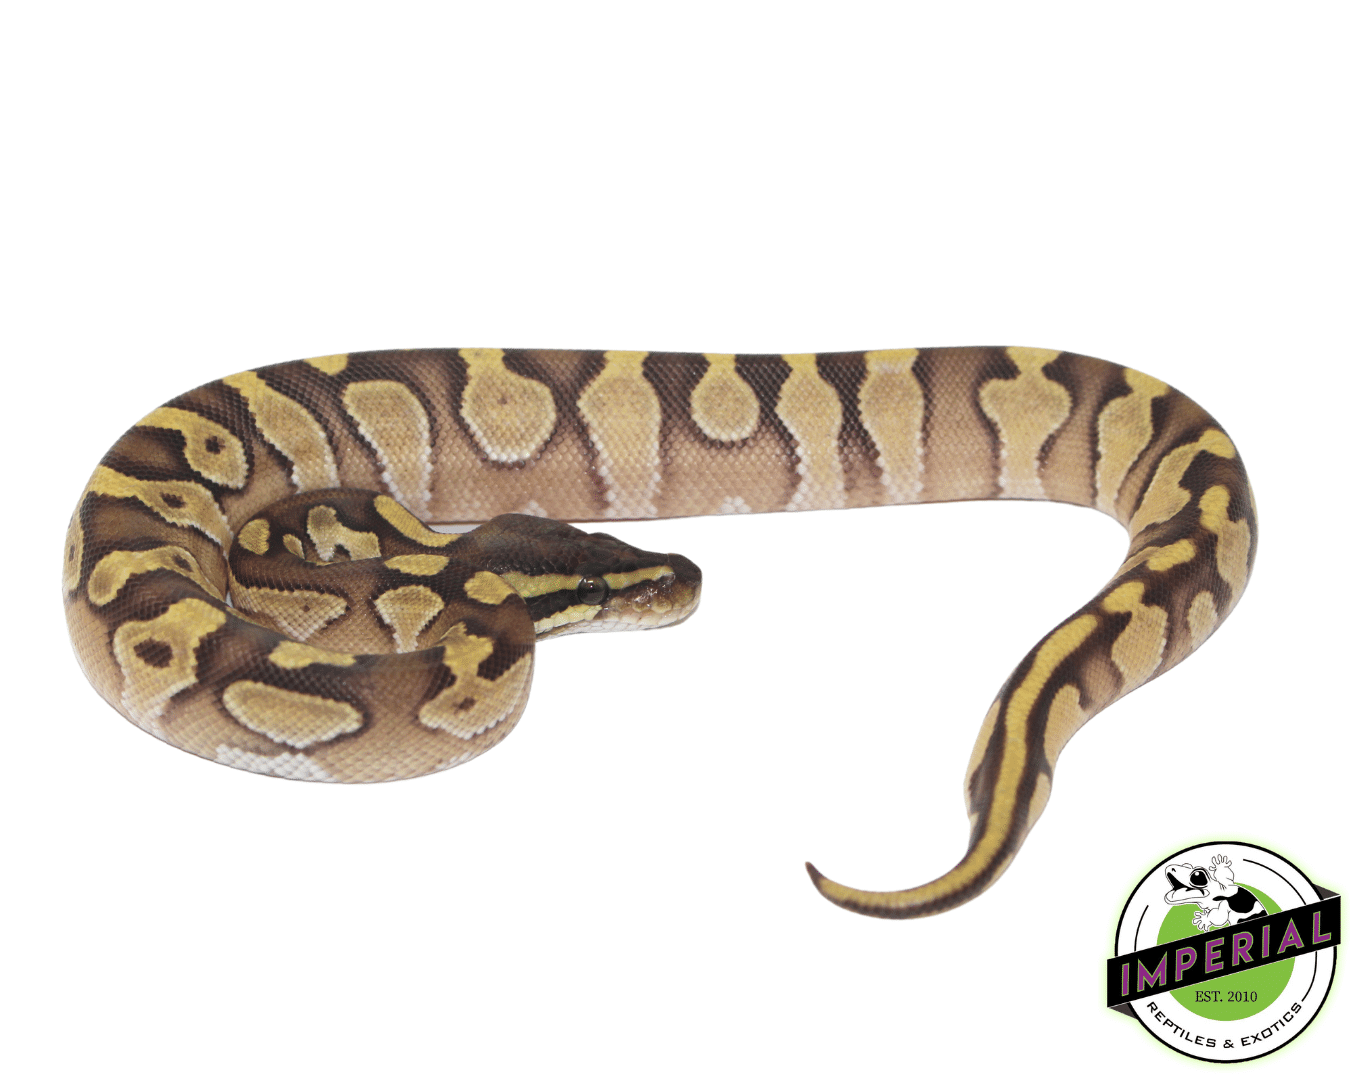 mochi ball python for sale, buy reptiles online